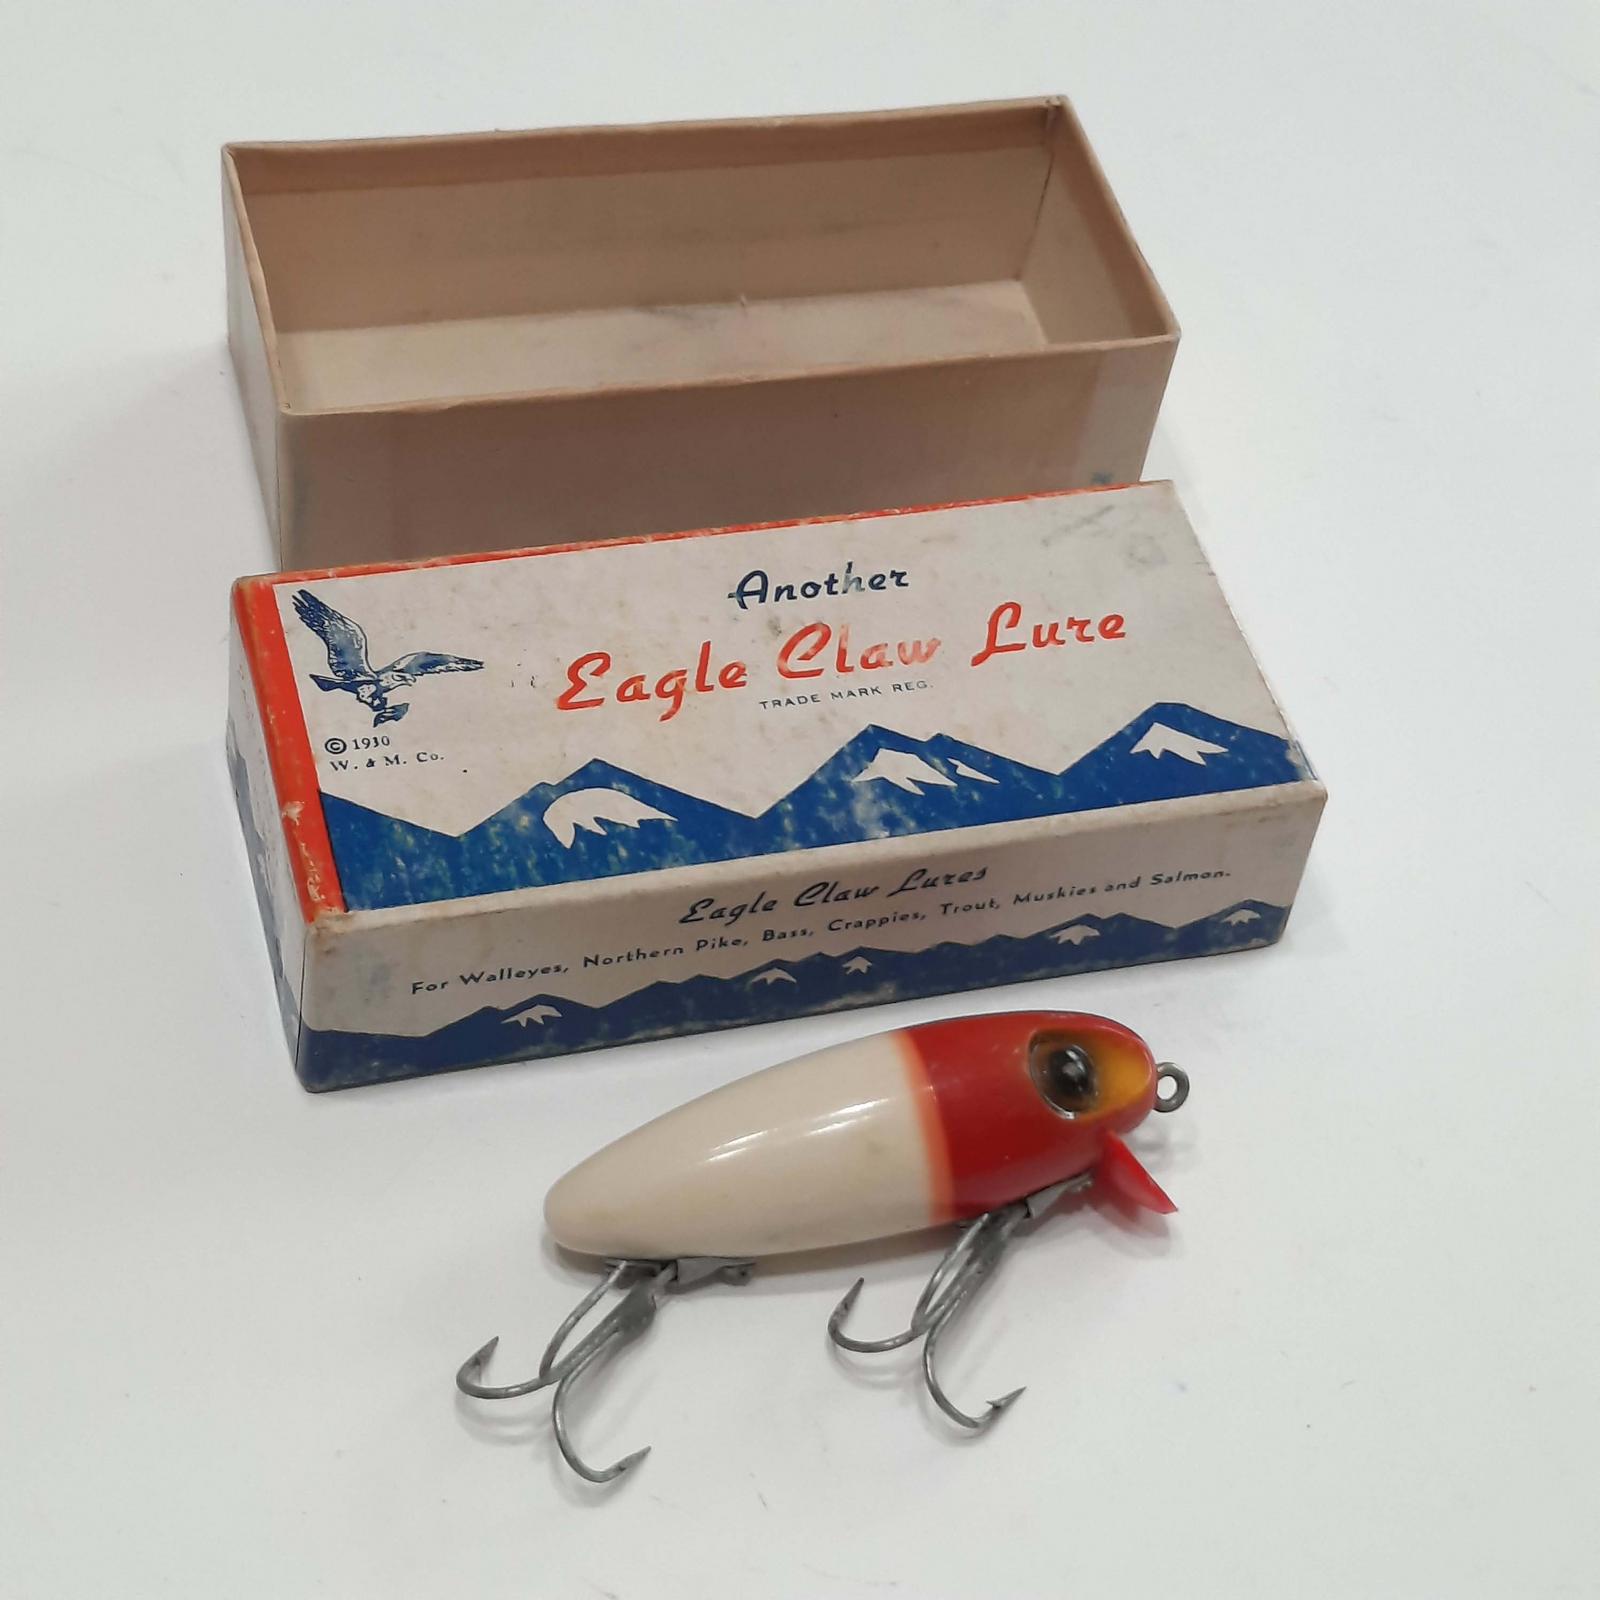 Sold at Auction: 1930 WRIGHT & MCGILL EAGLE CLAW FISH HOOK DISPLAY